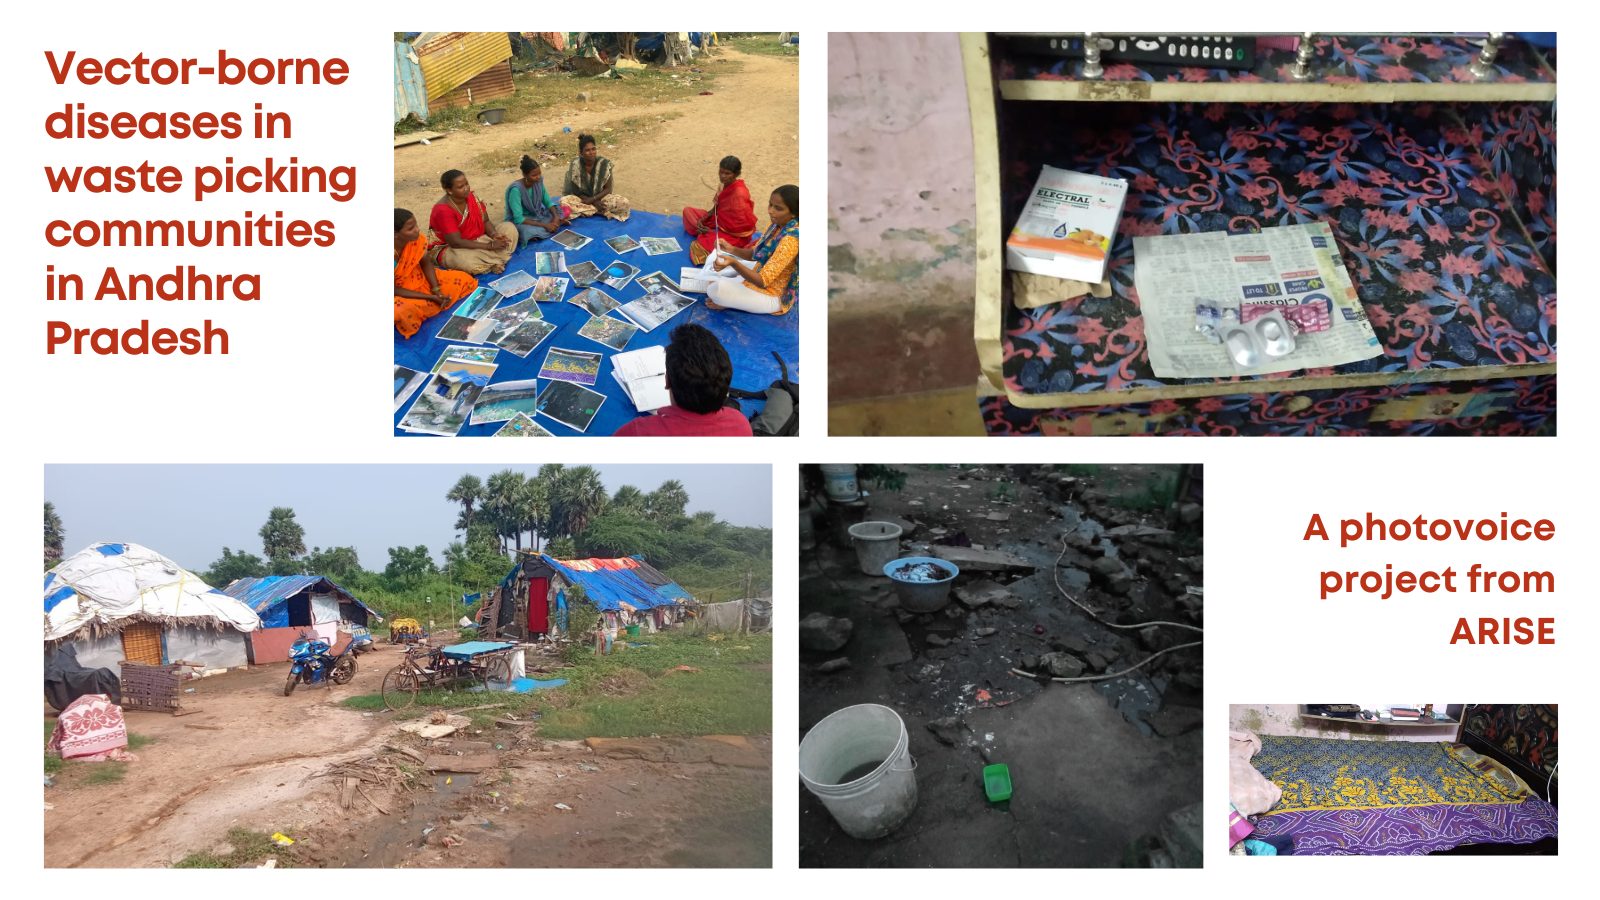 Collage of images from the Vector borne diseases project